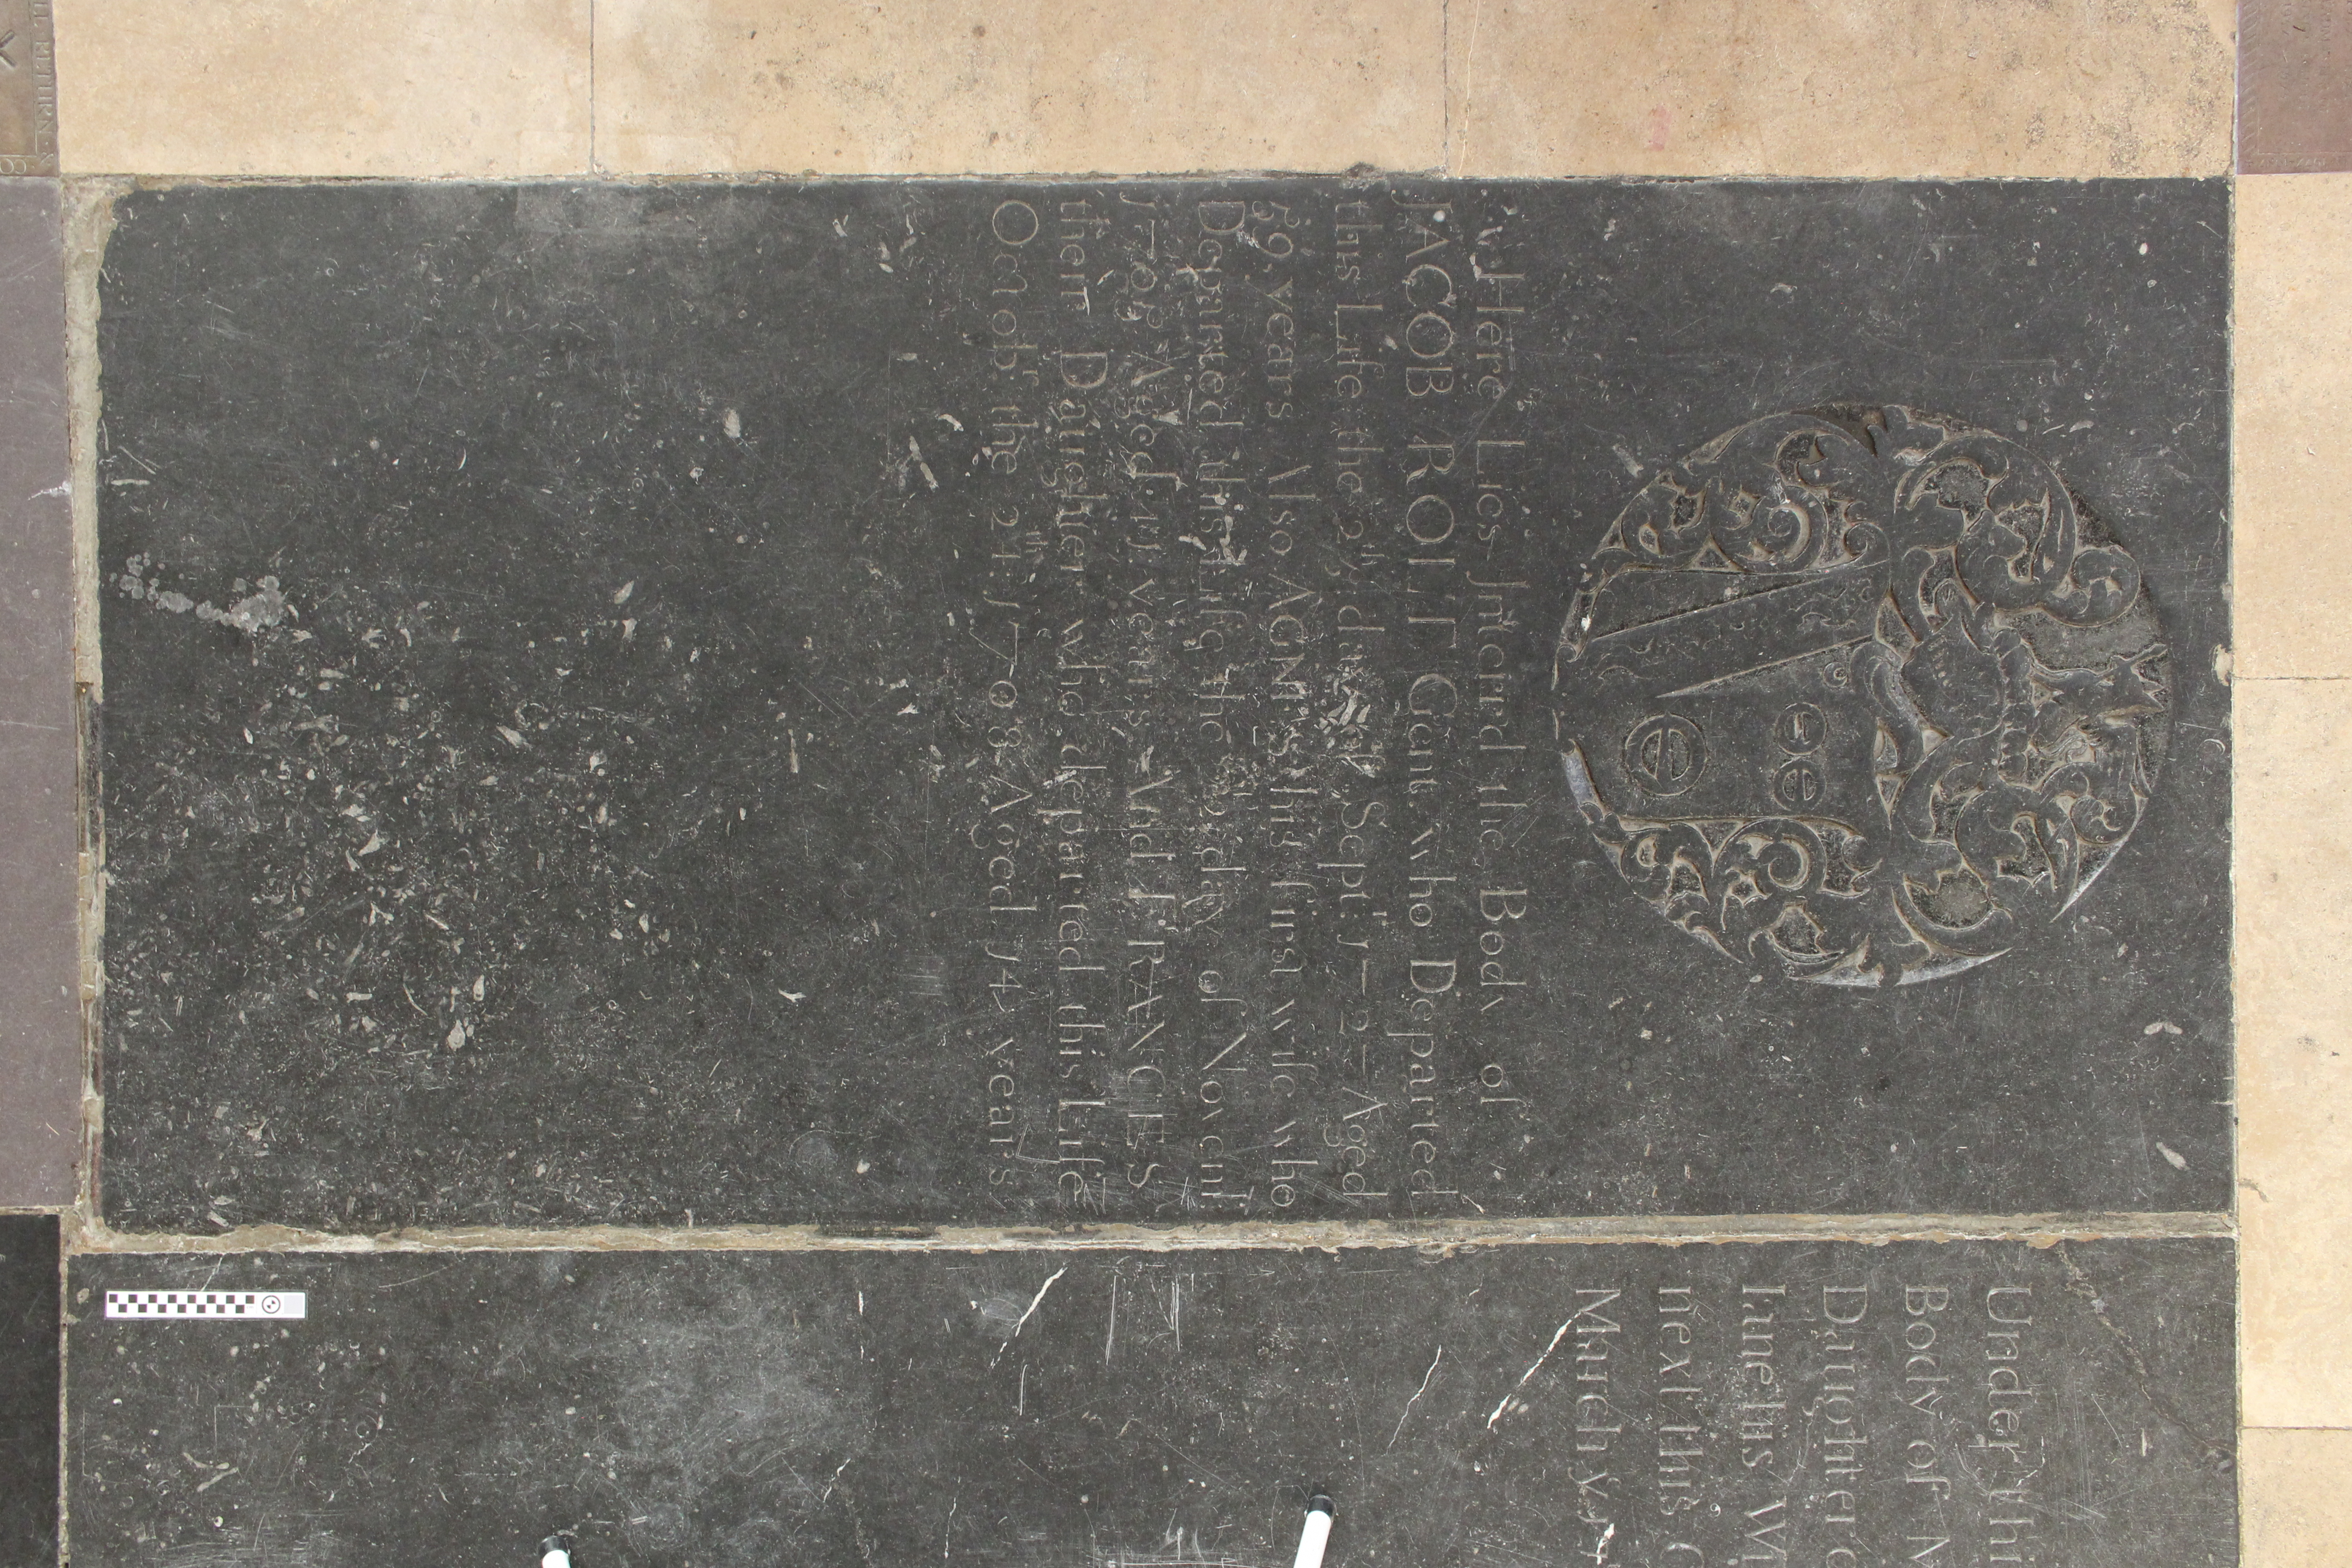 Photograph of the ledger stone dedicated to Frances, Agnes and Jacob Rolt in the Lady Chapel.